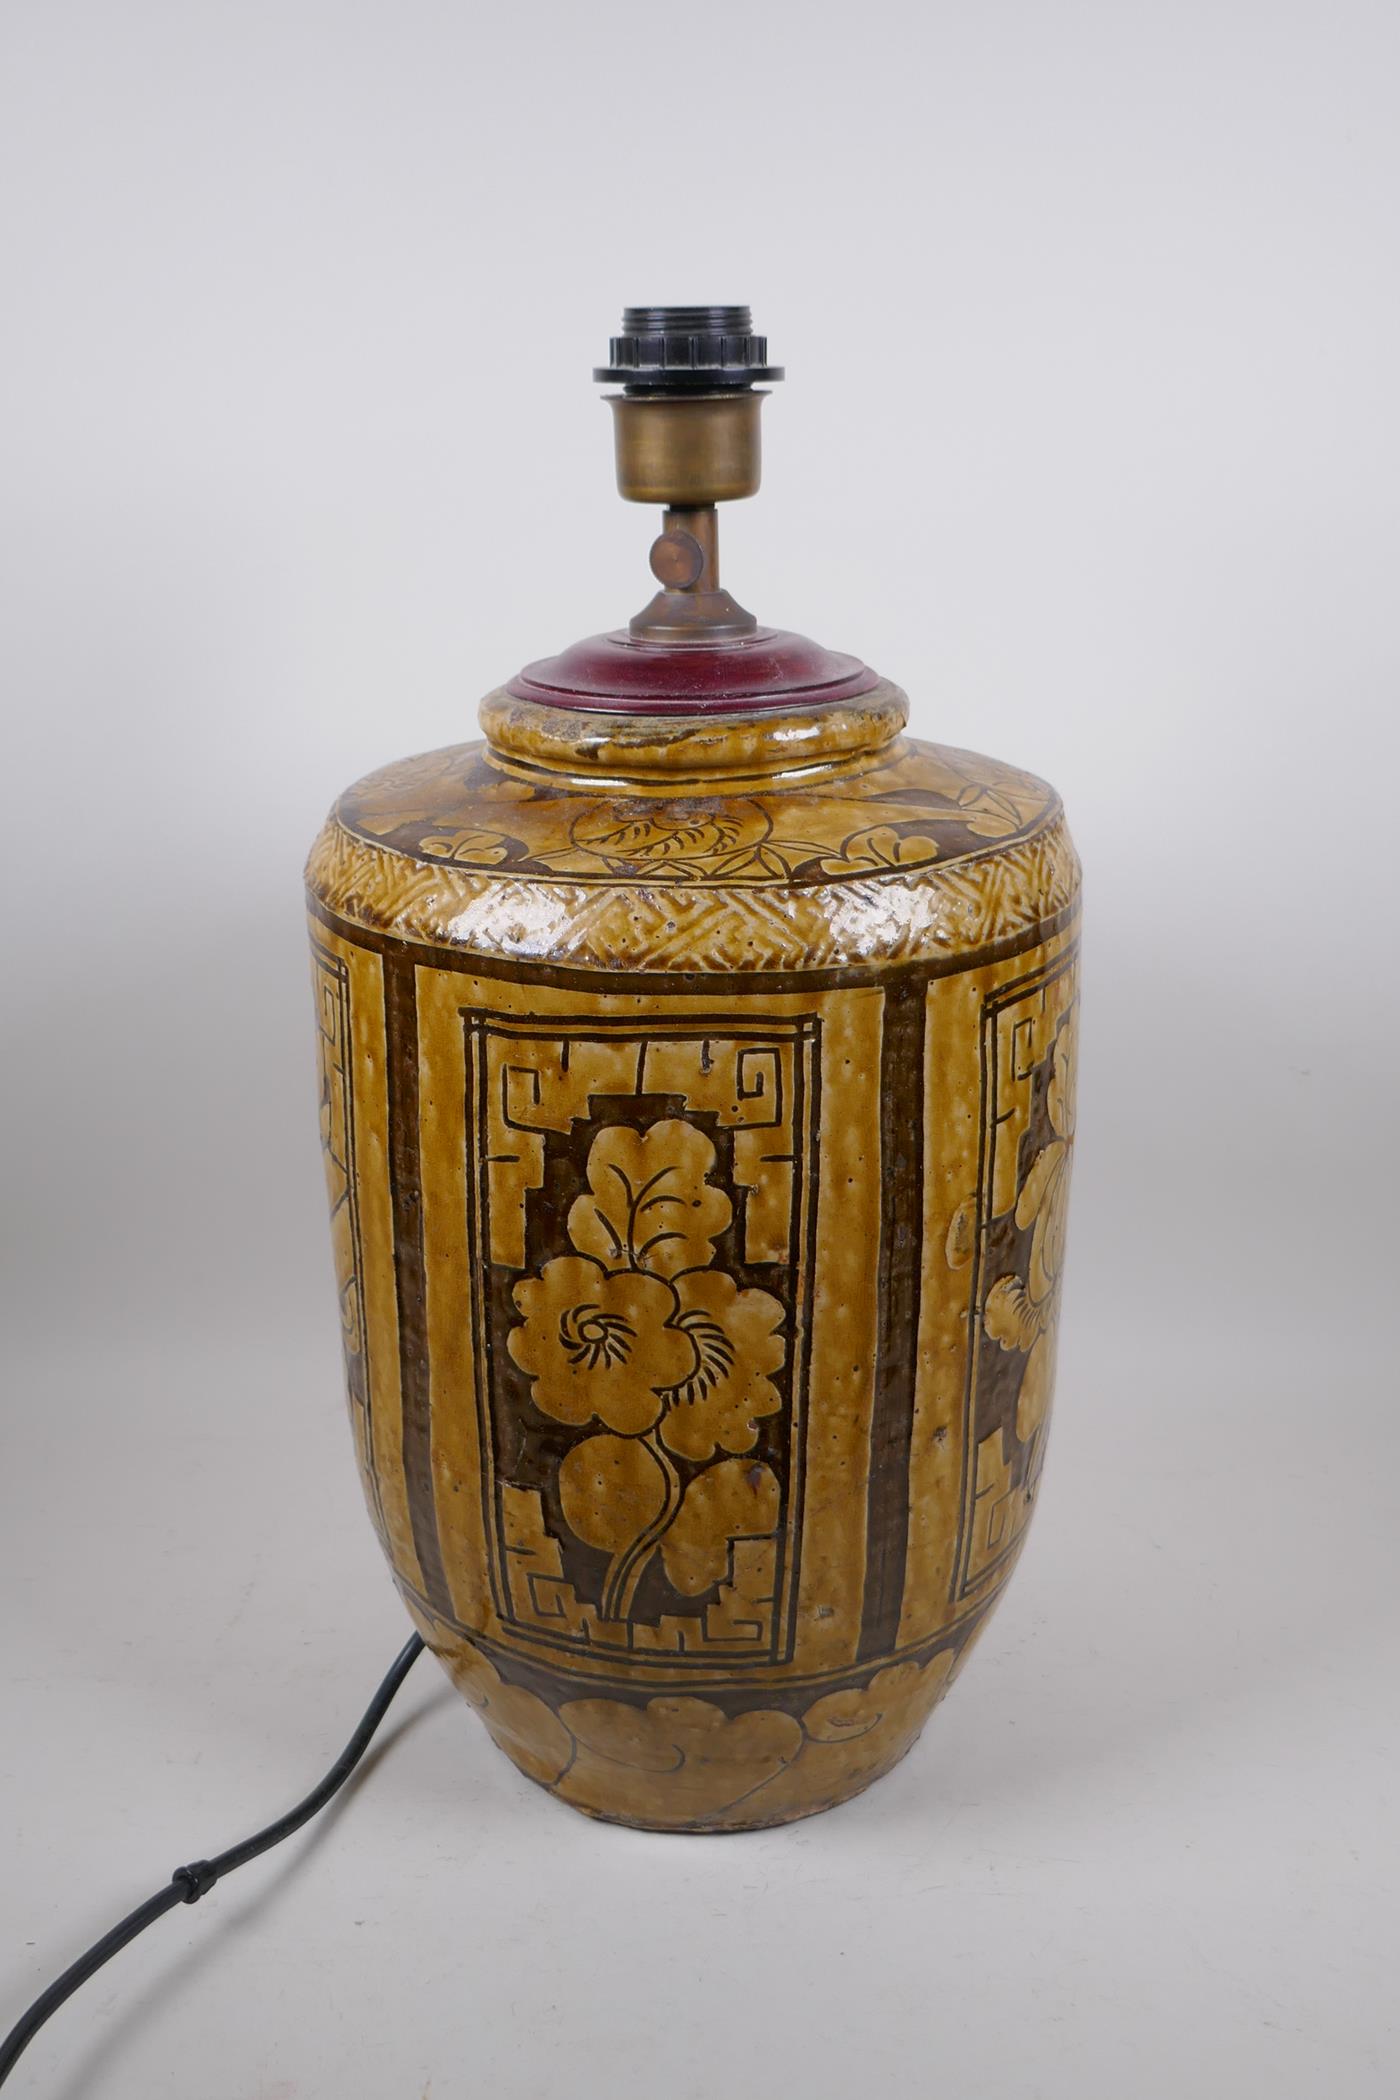 A C19th Chinese Cizhou kiln pottery jar, with decorative floral panels and bats, converted to a - Image 3 of 5